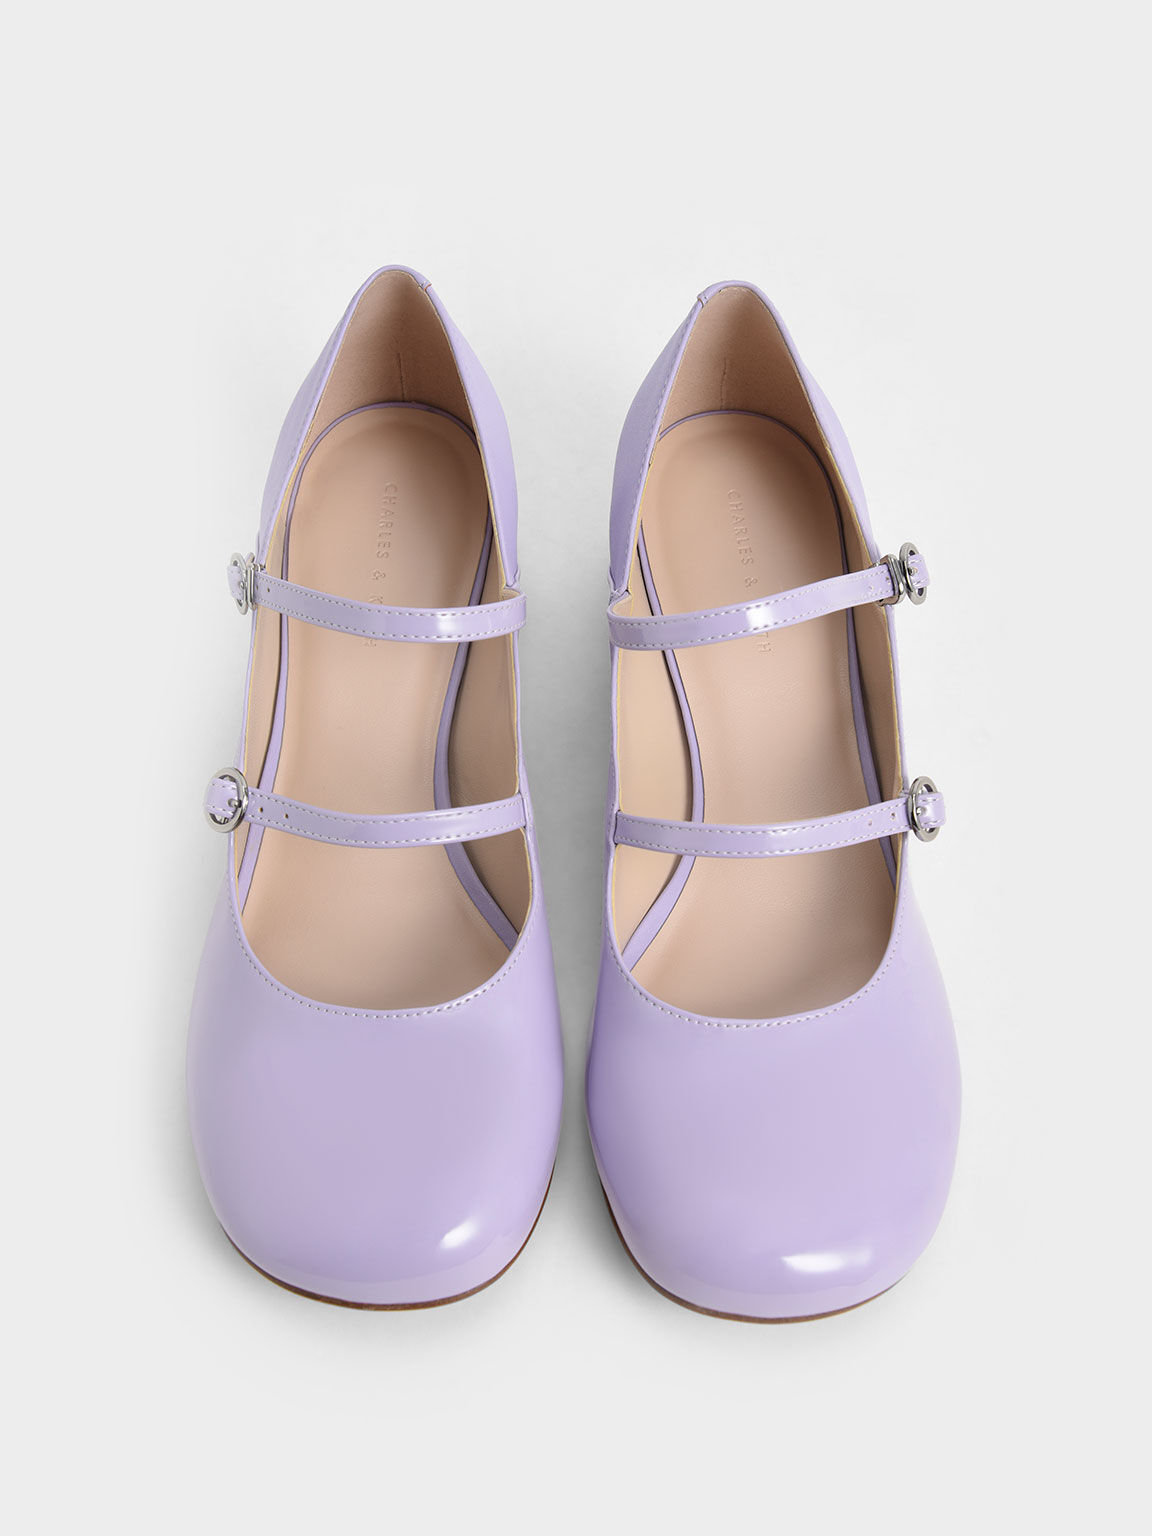 Patent Double-Strap Mary Janes, Lilac, hi-res